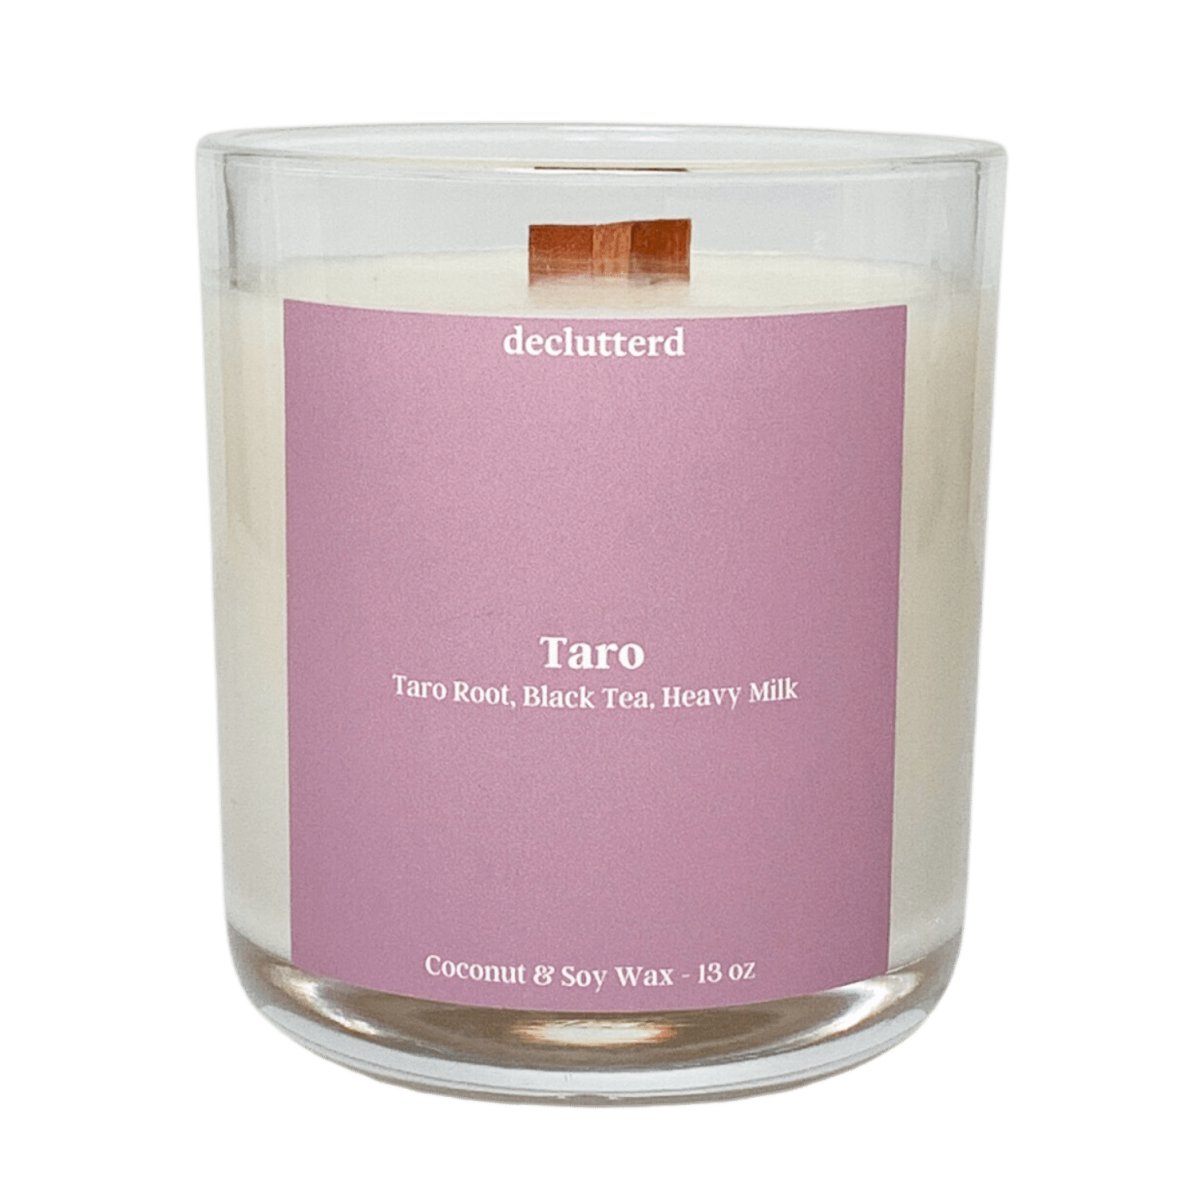 declutterd Taro Wood Wick Candle - lily & onyx